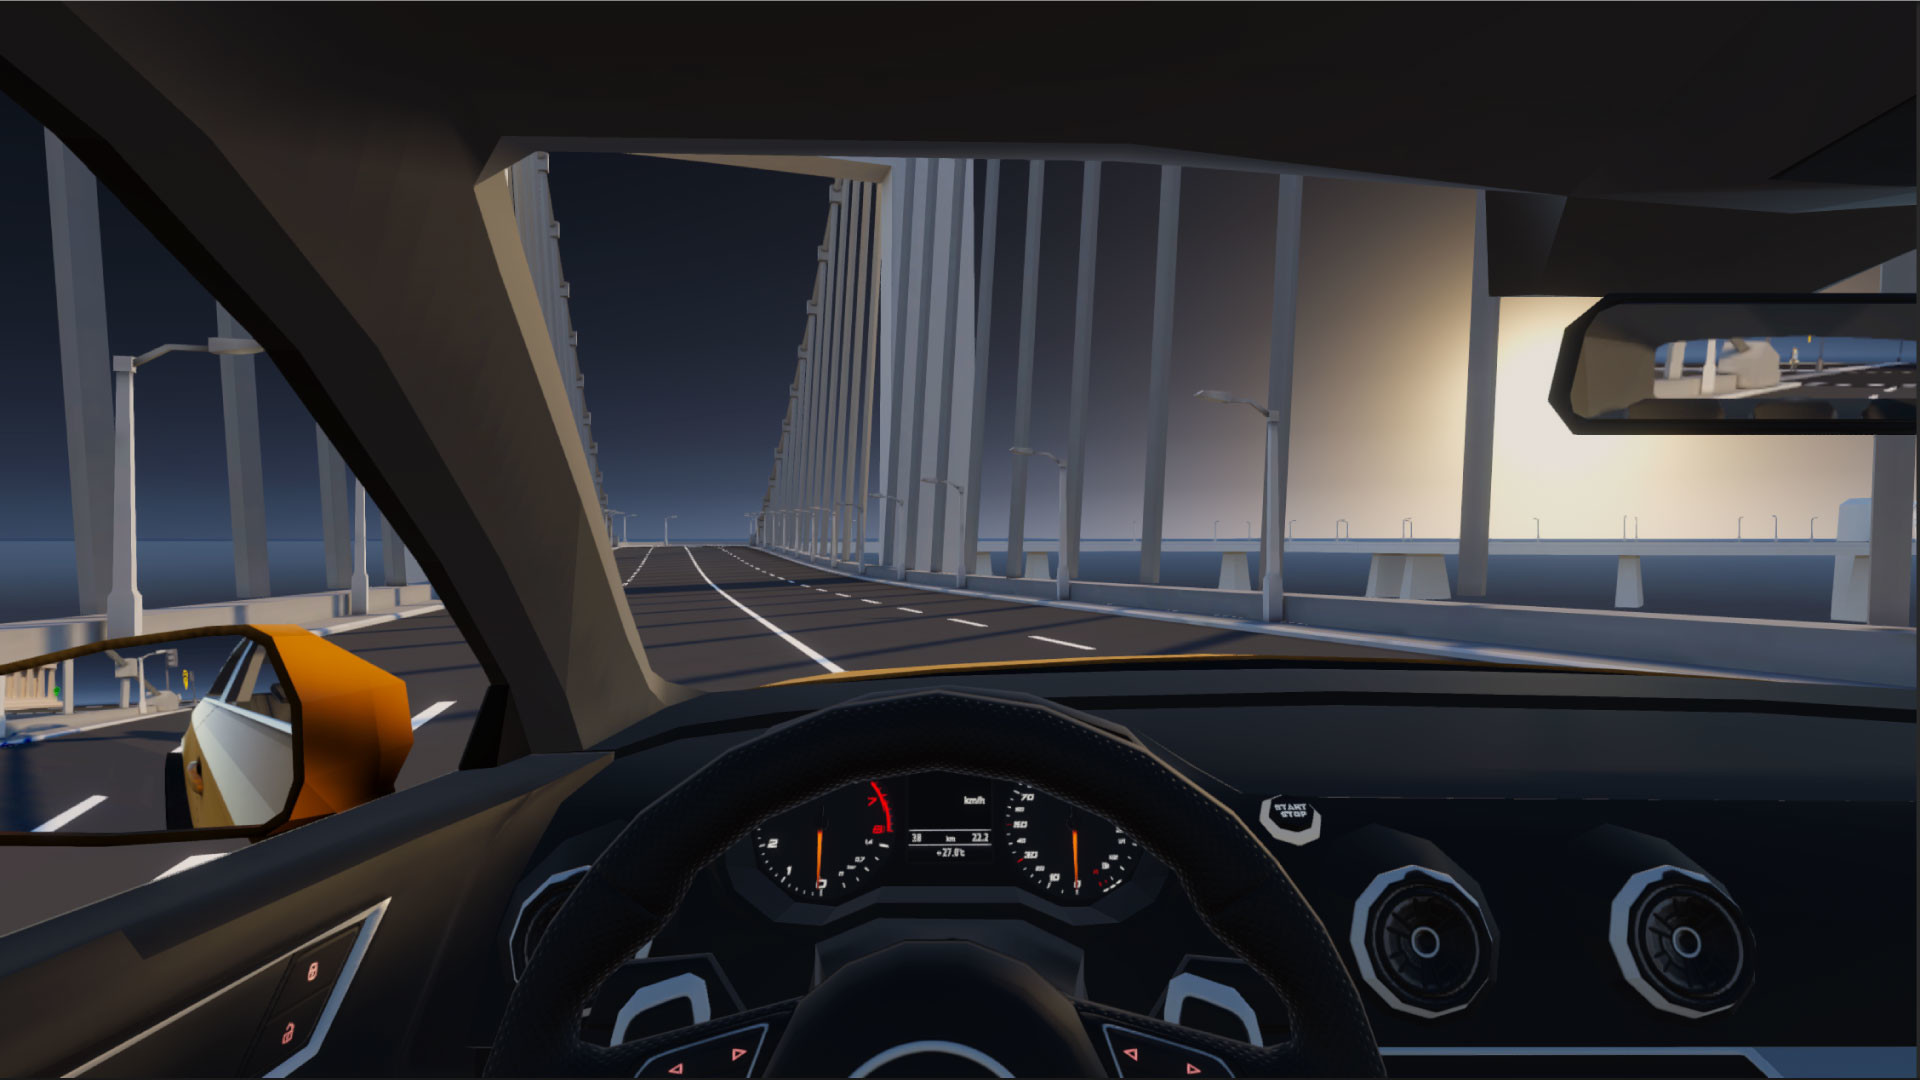 How to Download Super Realistic Interior of Cars in Car Parking